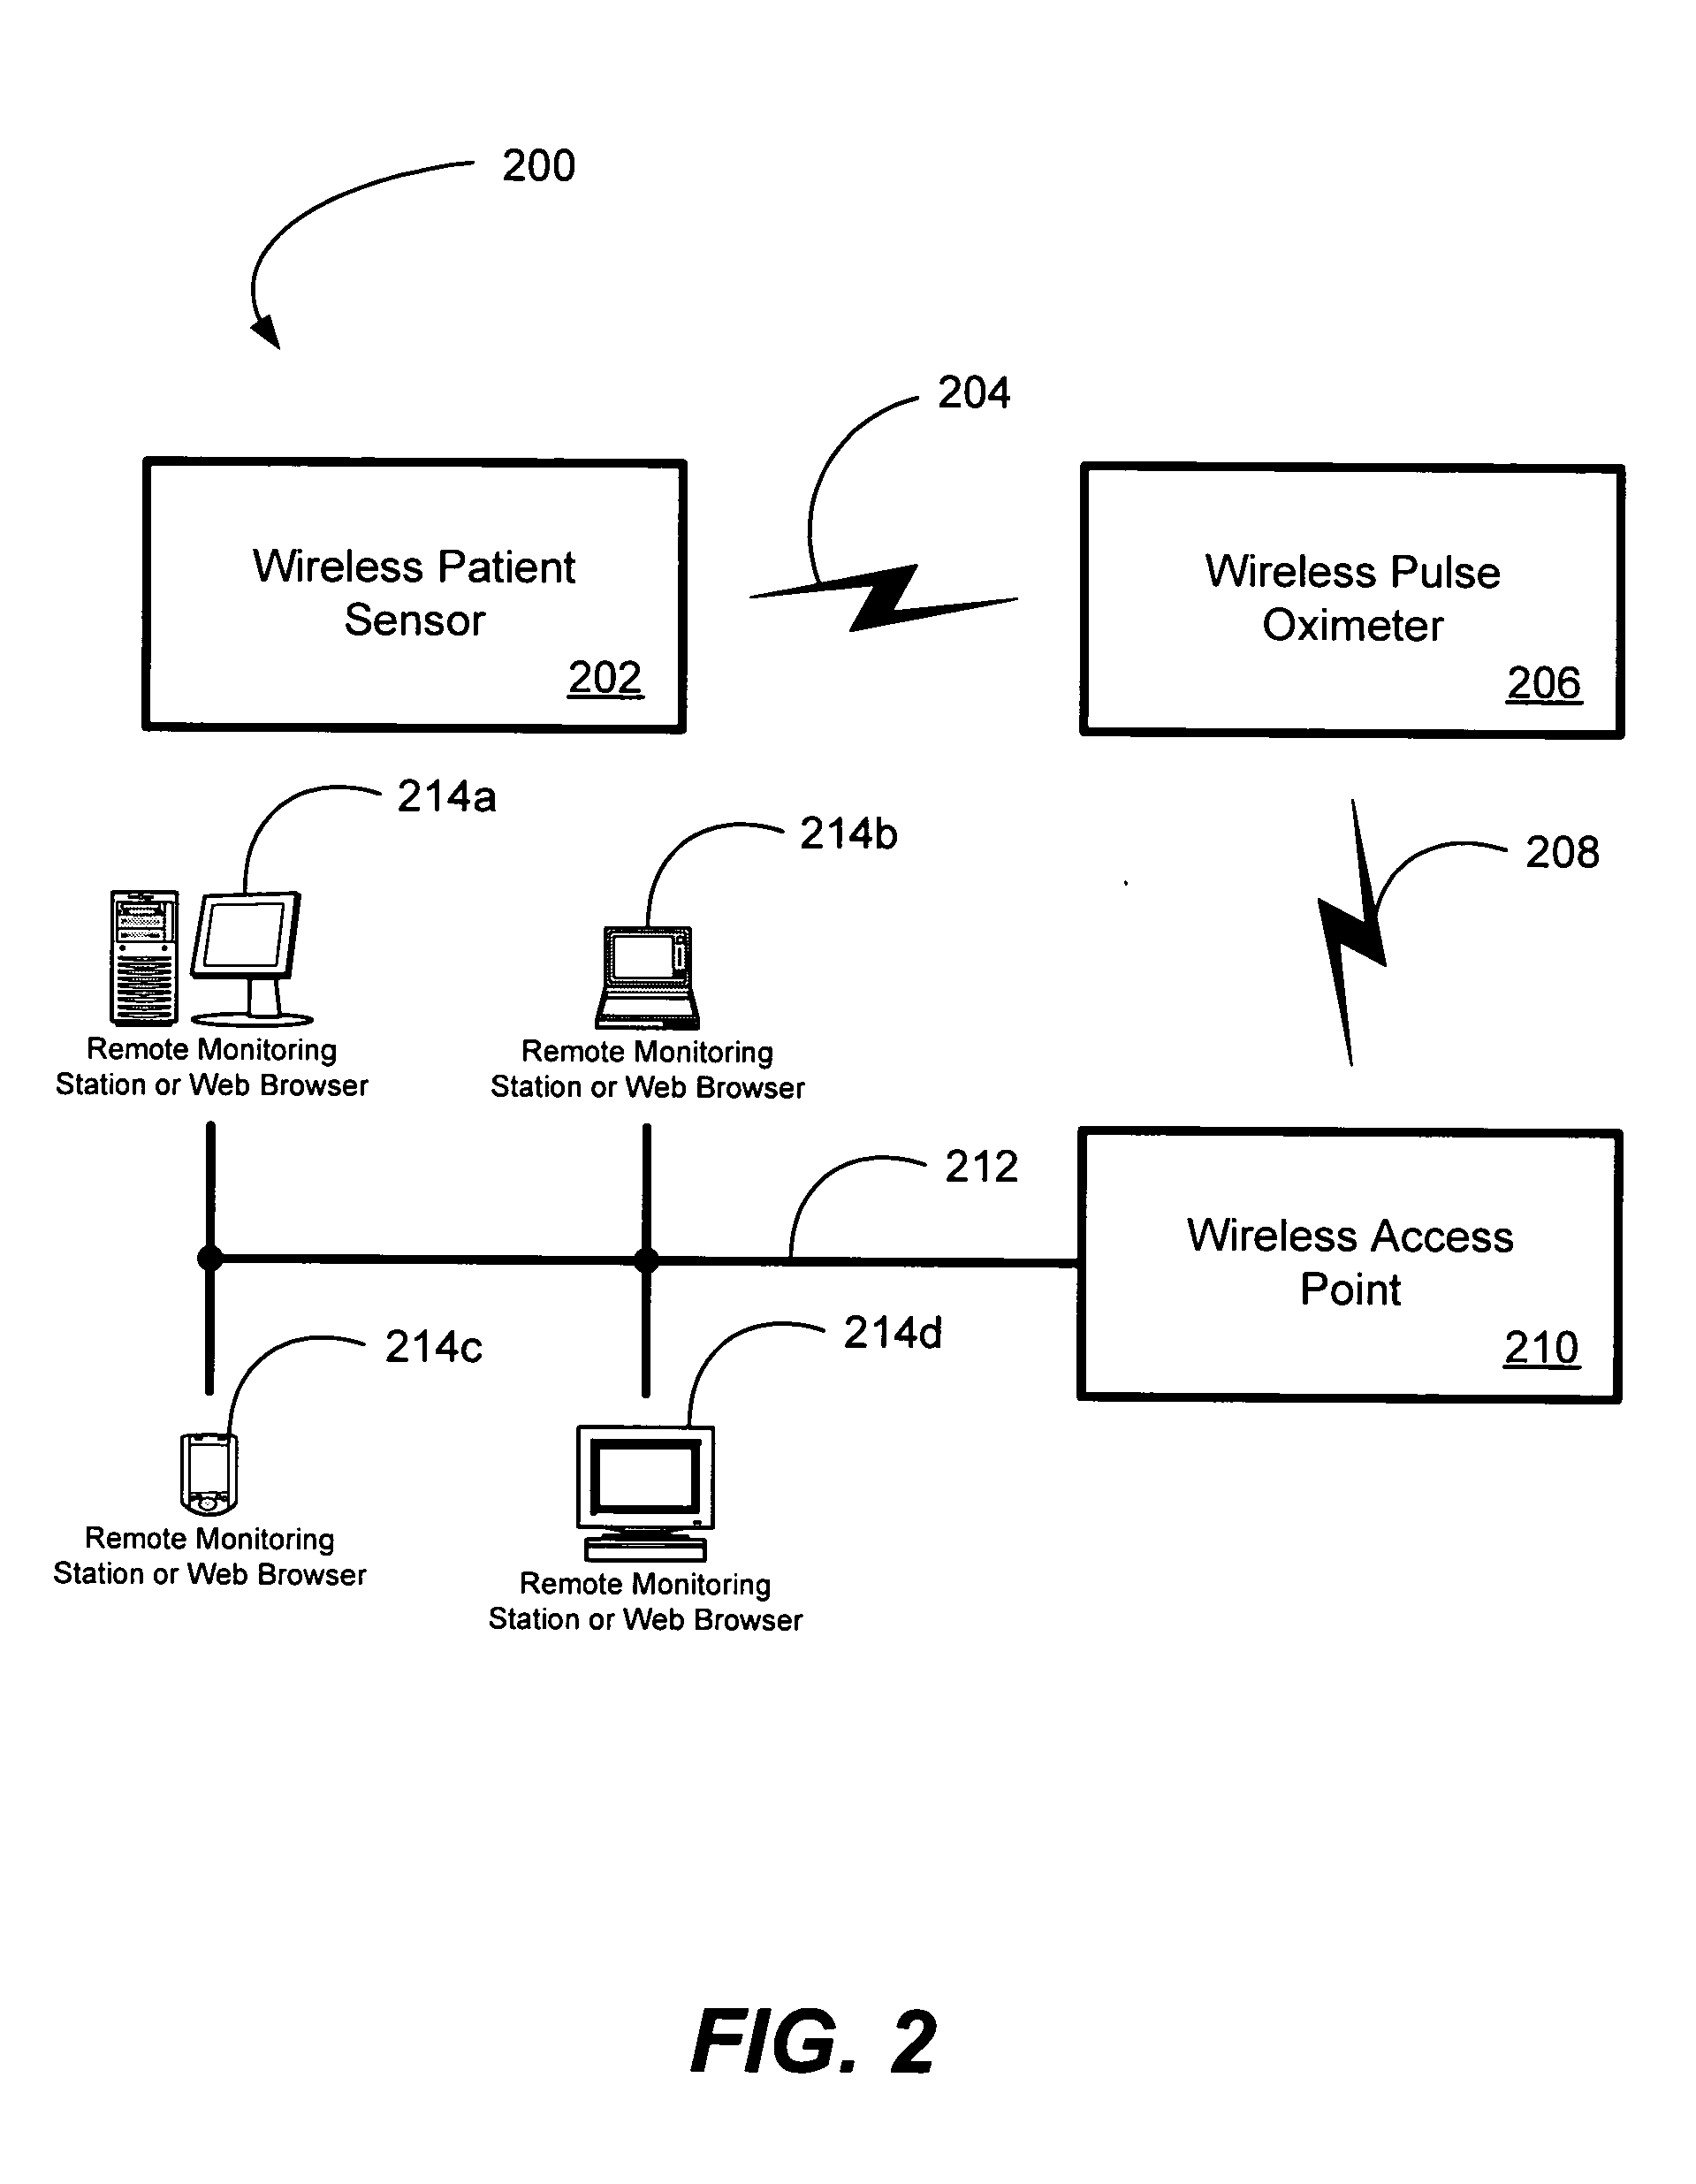 Wireless pulse oximeter configured for web serving, remote patient monitoring and method of operation